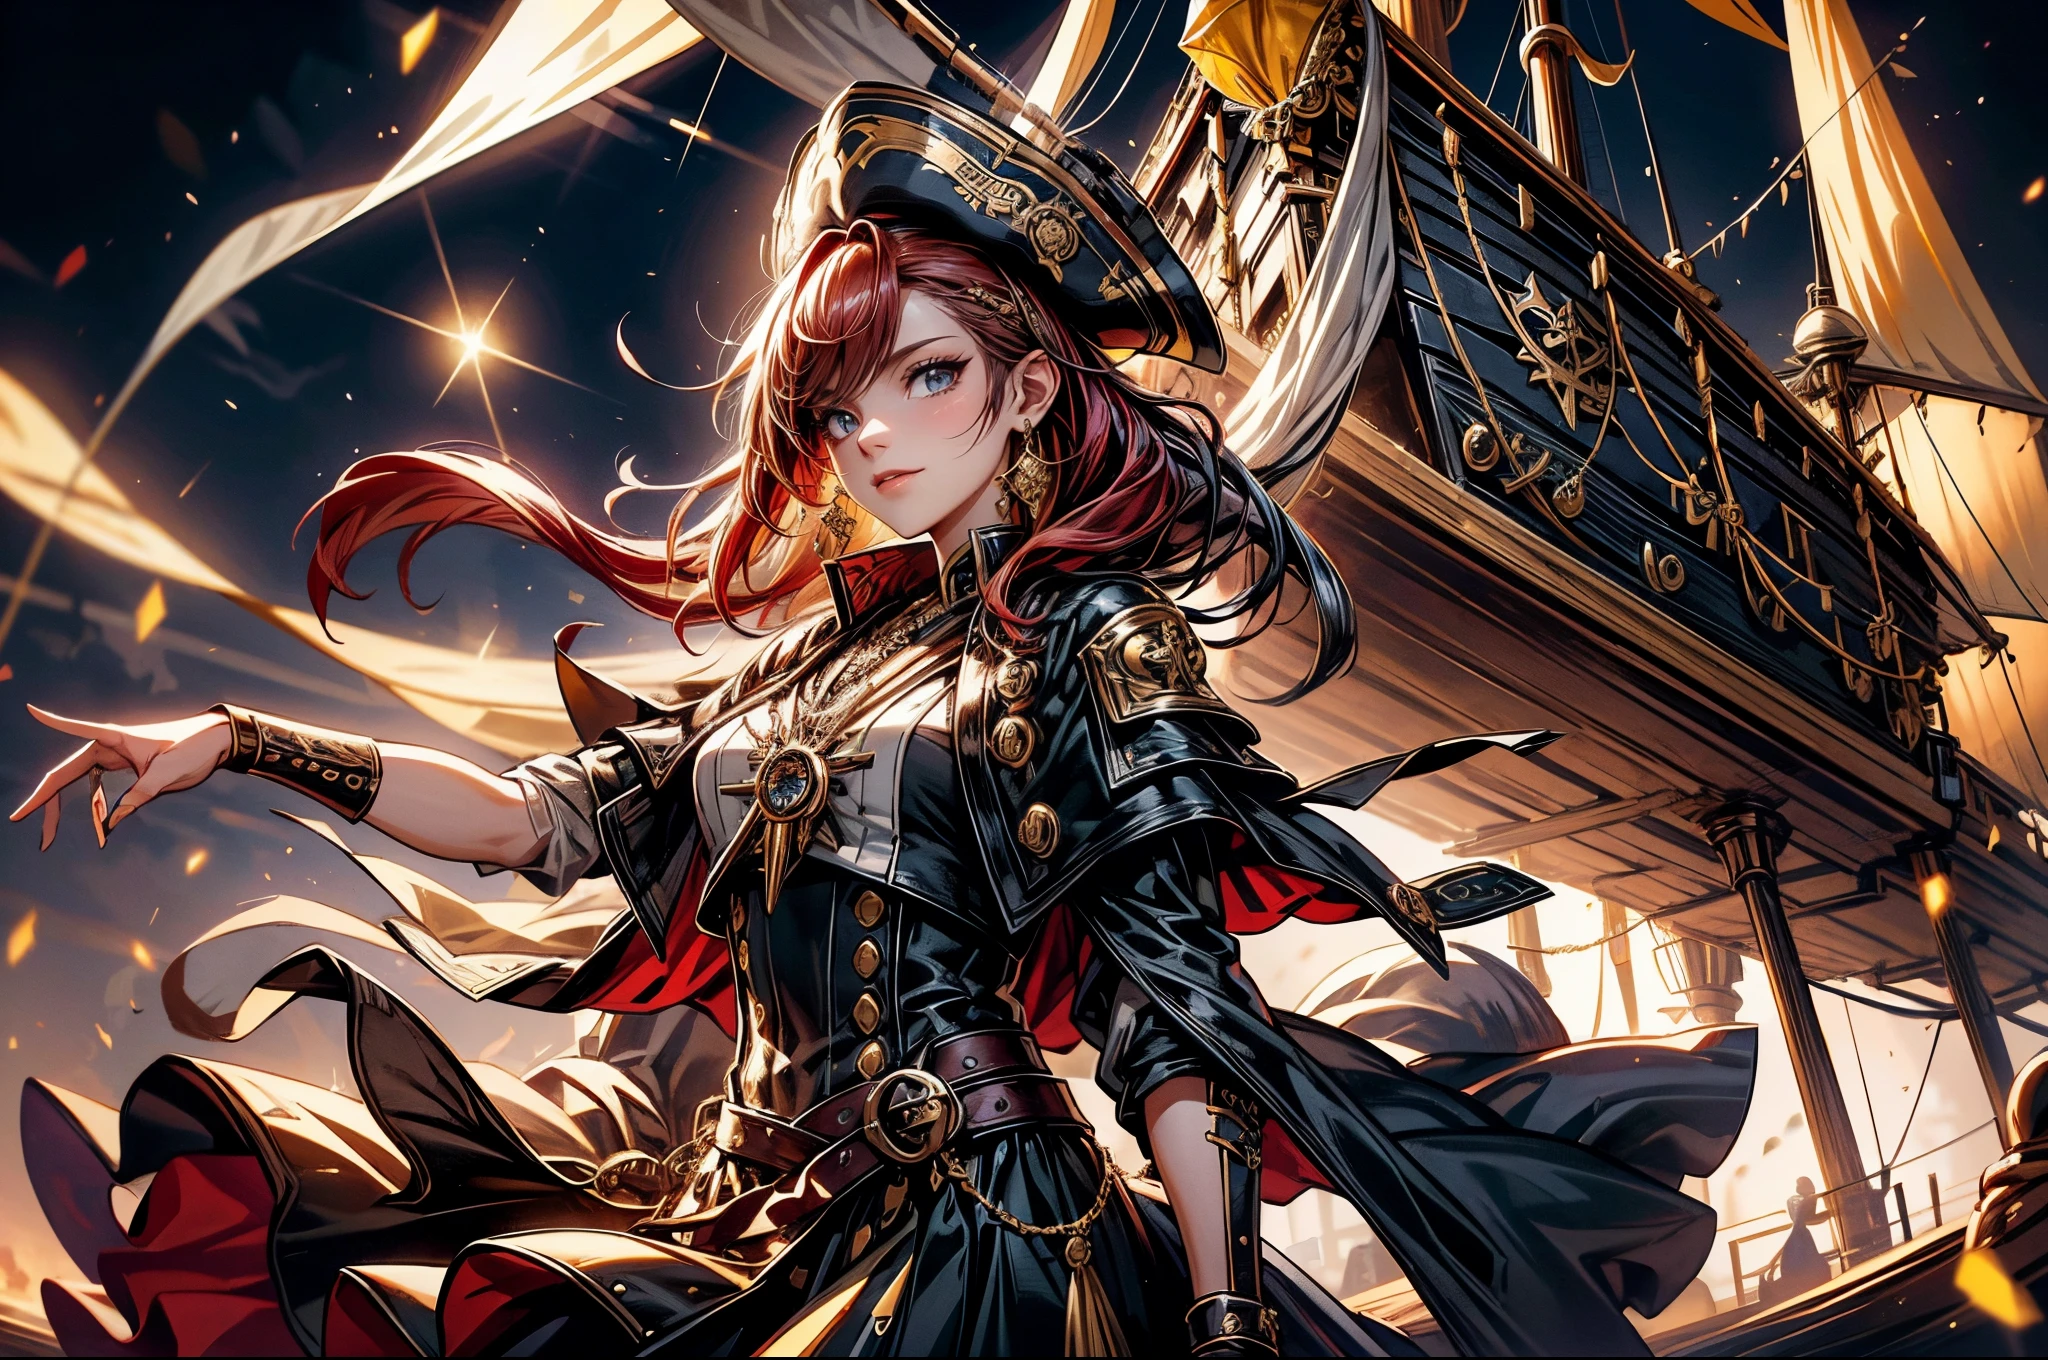 steering wheel on a boat, ship interior, pirate ship in background, on a pirate ship, old wooden ship, on the deck of a ship, victorian fire ship, pirate ship, old pirate ship, pirate setting, wooden boat, wooden sailboats,anime girl with red hair and a white blouse , epic exquisite character art,cheongsam,a black and gold dress with a gold and black cape, gilded black uniform flowing robes and leather armor,  black with yellow accents, fantasy style clothing, fantasy outfit,